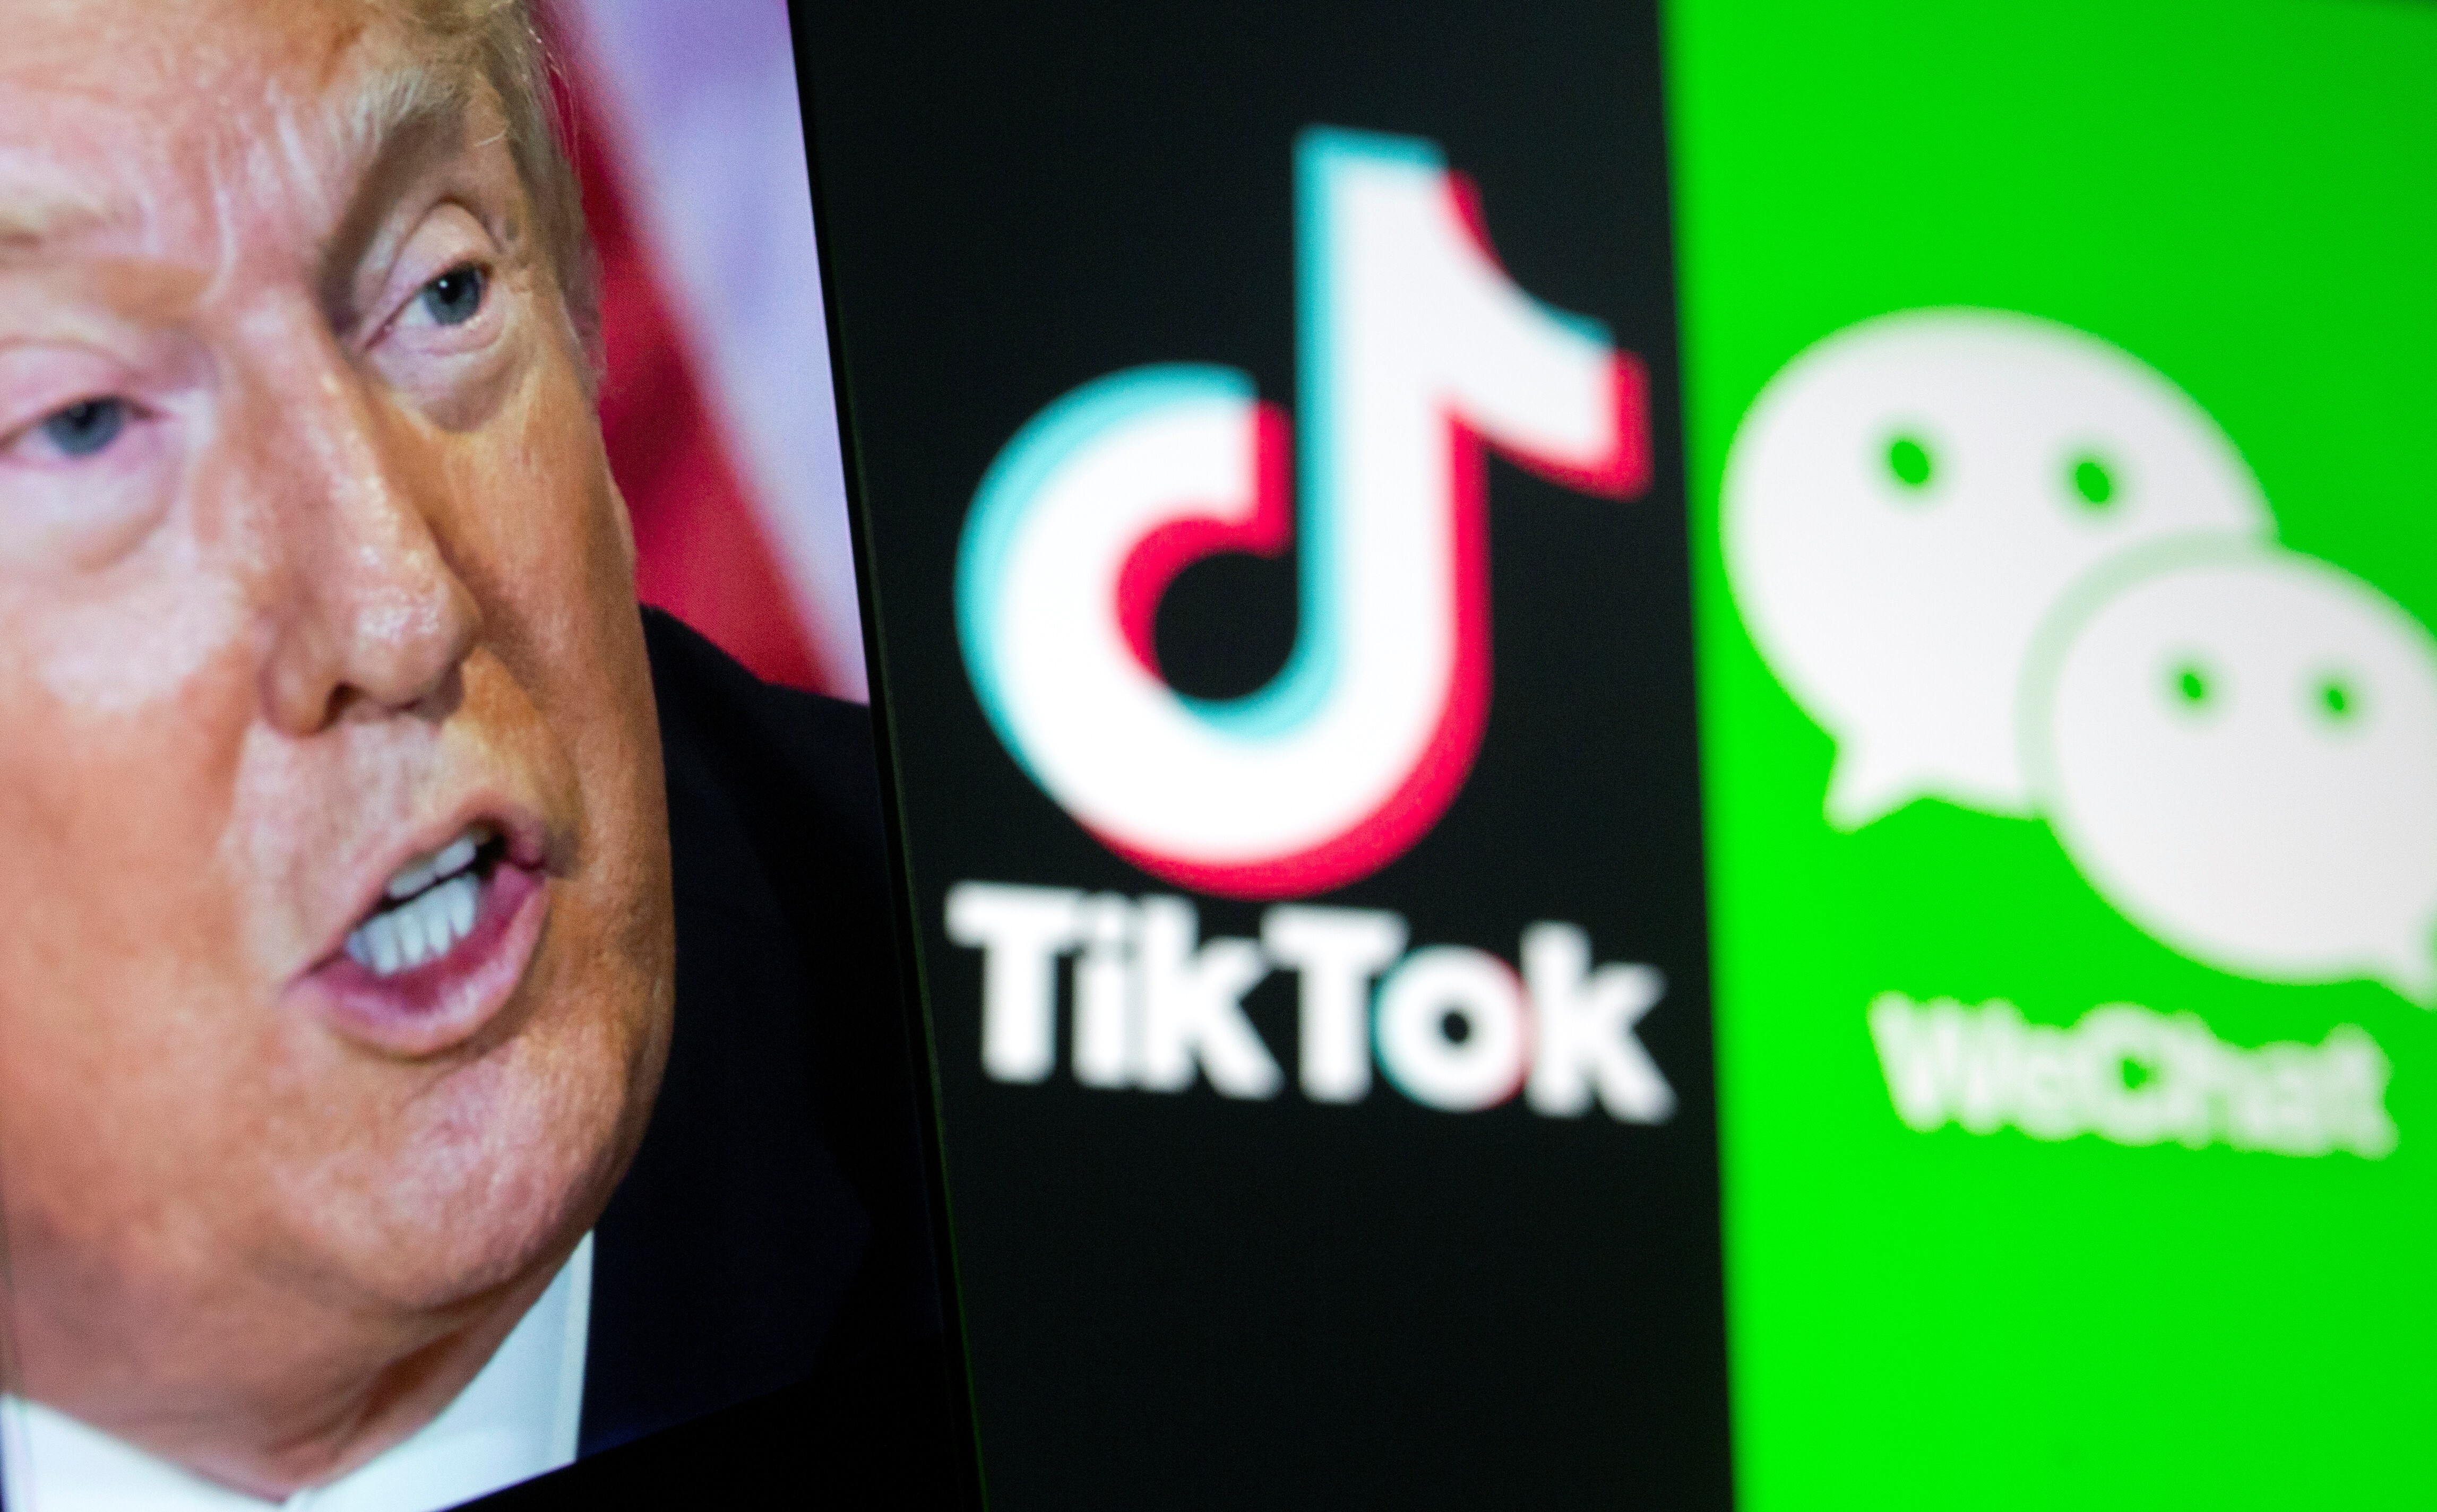 US President Donald Trump’s crusade against TikTok on national security grounds could have far-reaching effects on US-based internet firms if it sparks a global backlash. Photo: Reuters